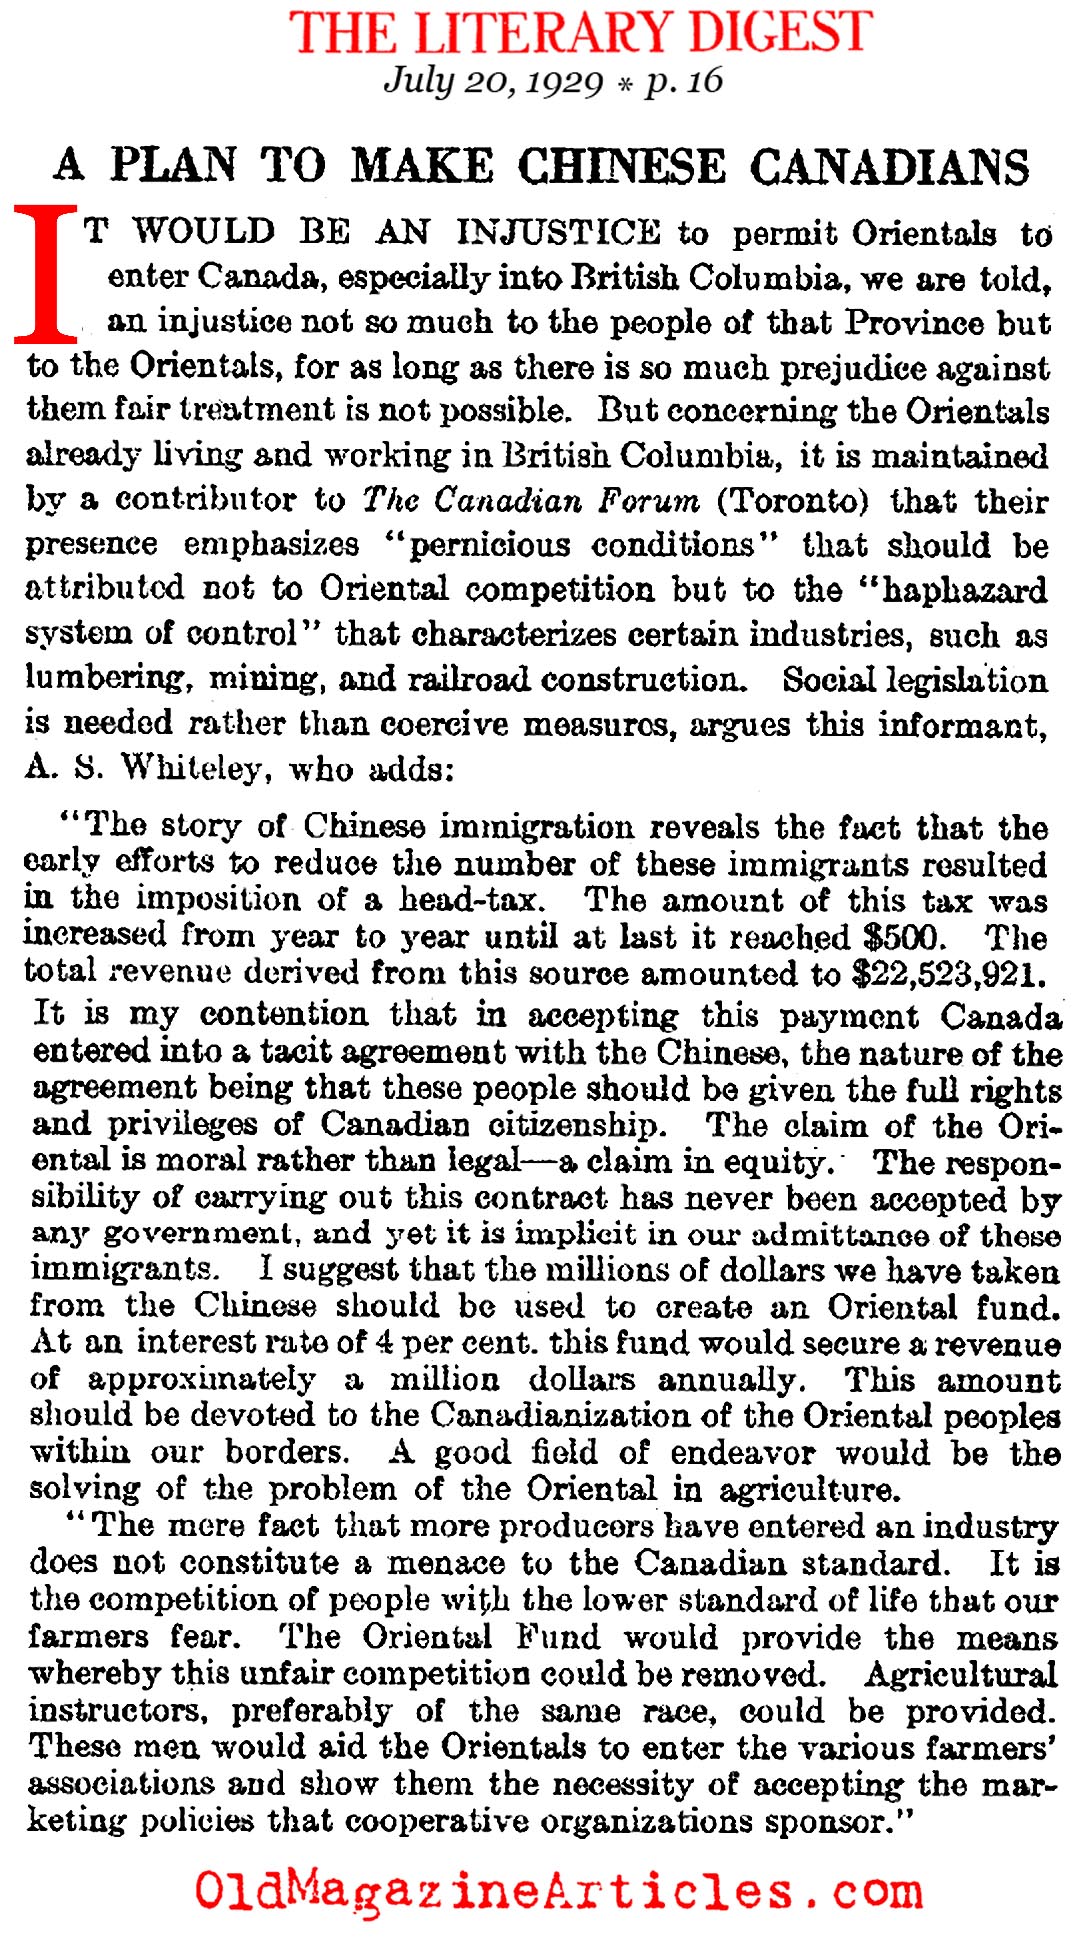 ''A Plan to Make Chinese Canadians'' (Literary Digest, 1929)